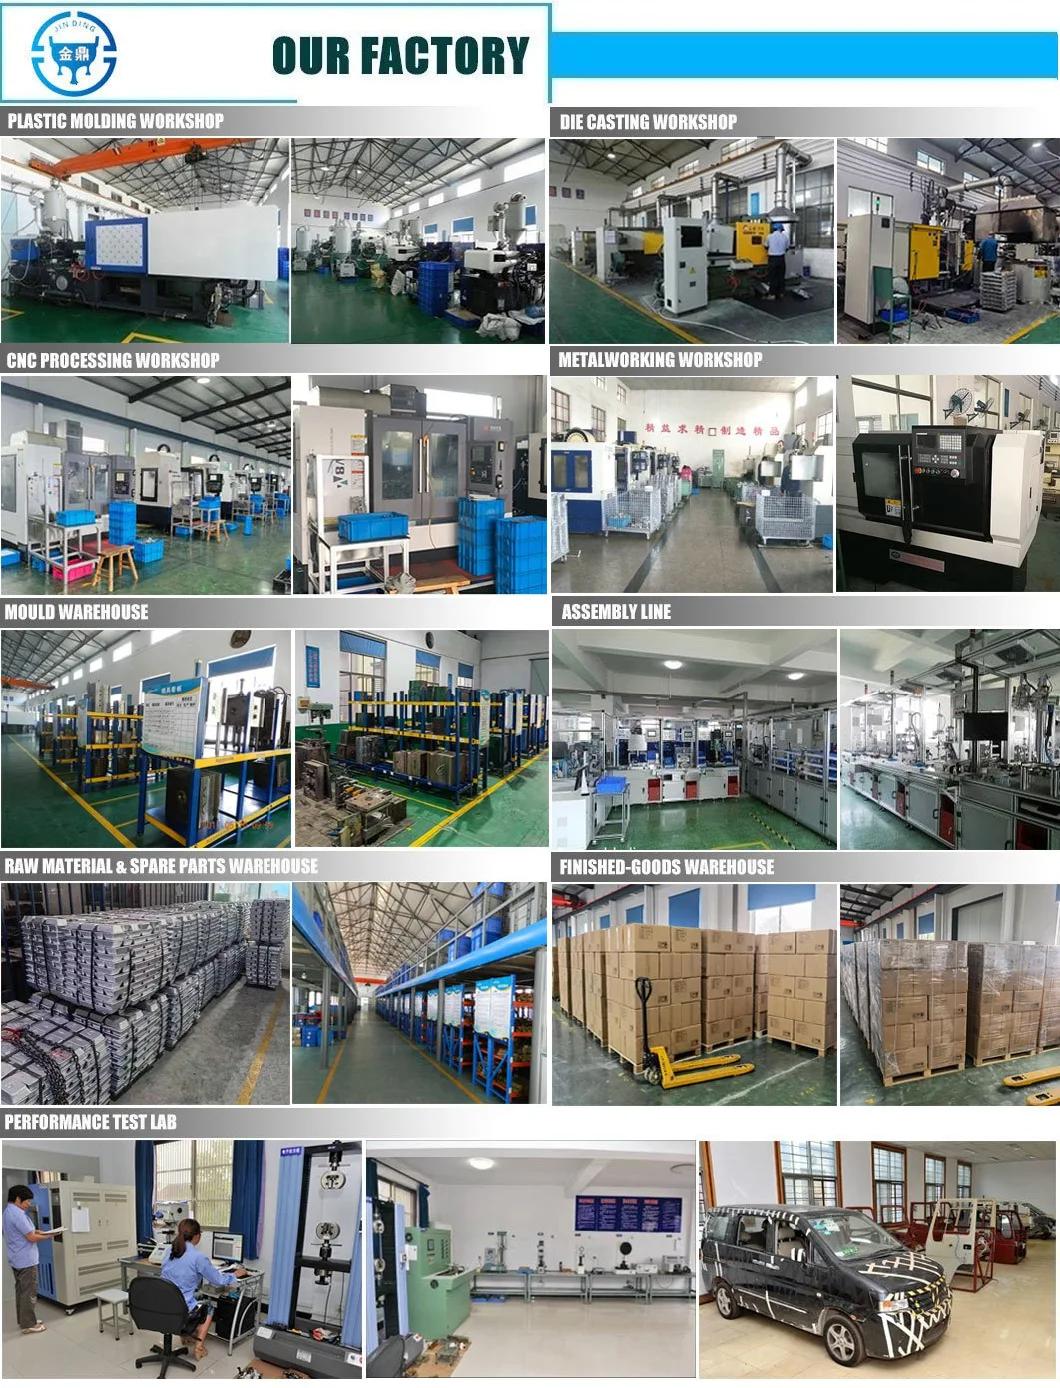 Machinery Parts Auto Car/Truck/Lock/LED Housing Die Casting Tooling